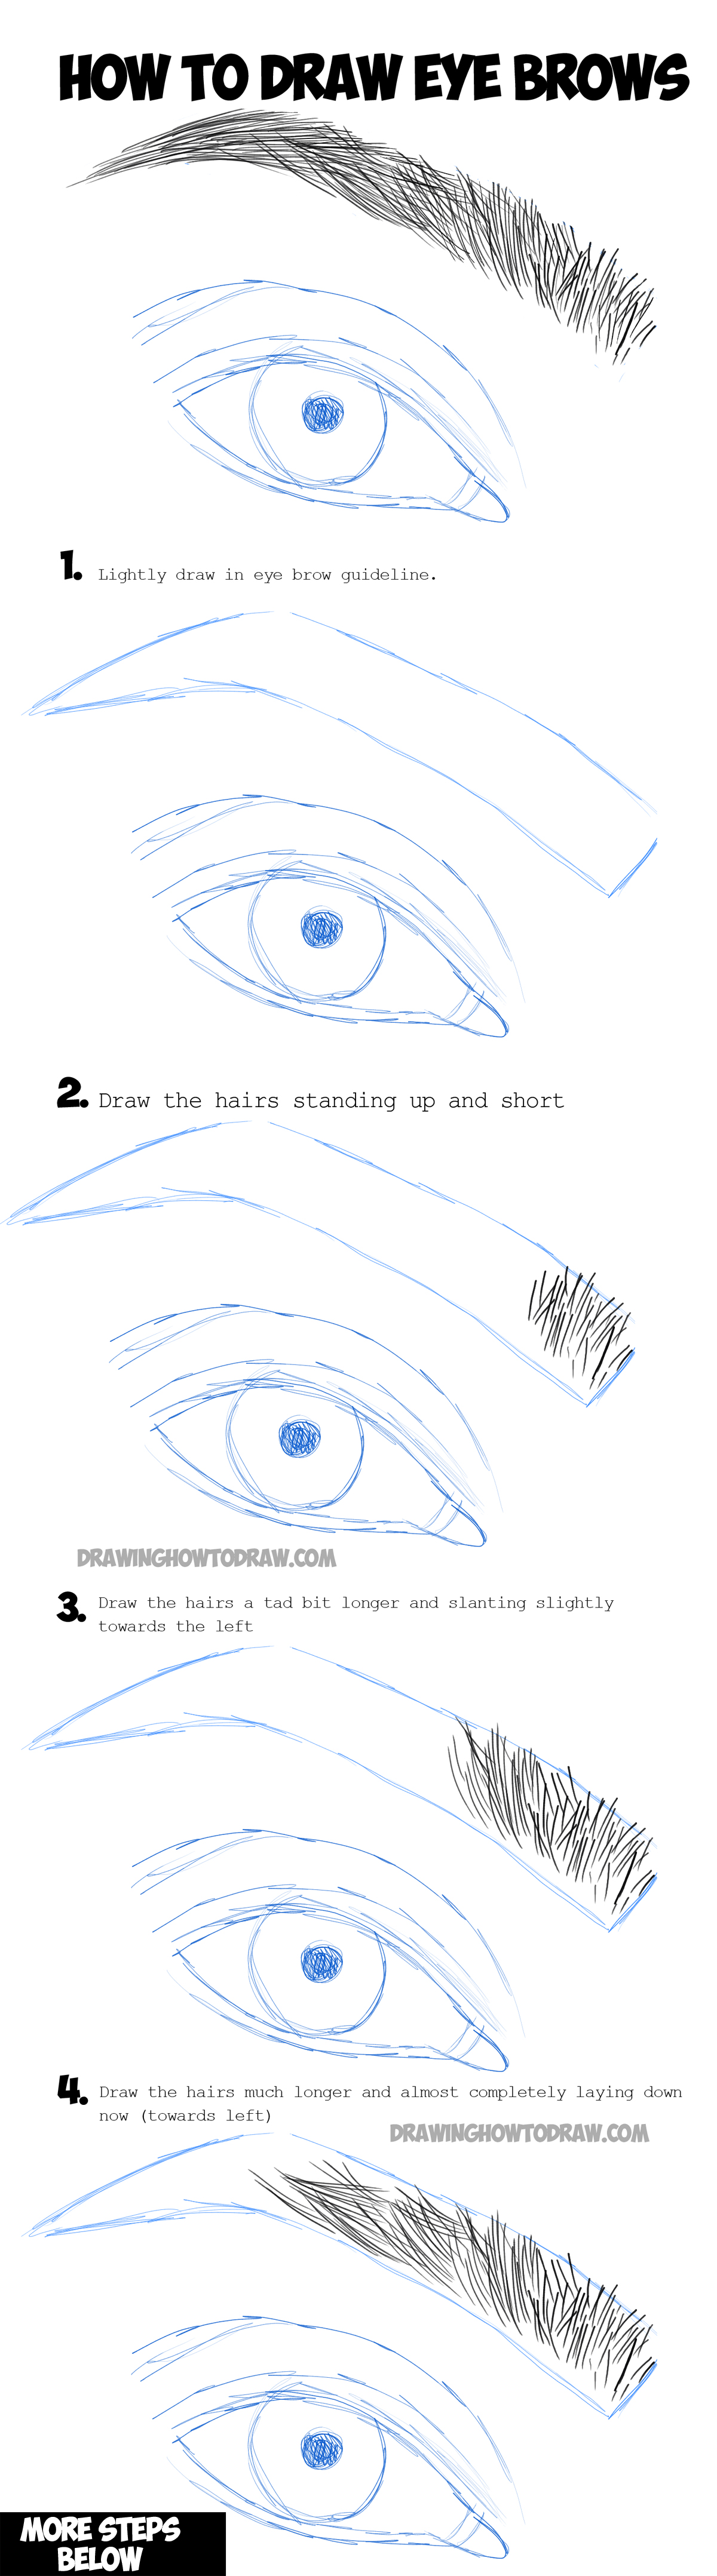 Learn How to Draw Eye Brows Step by Step Drawing Tutorial